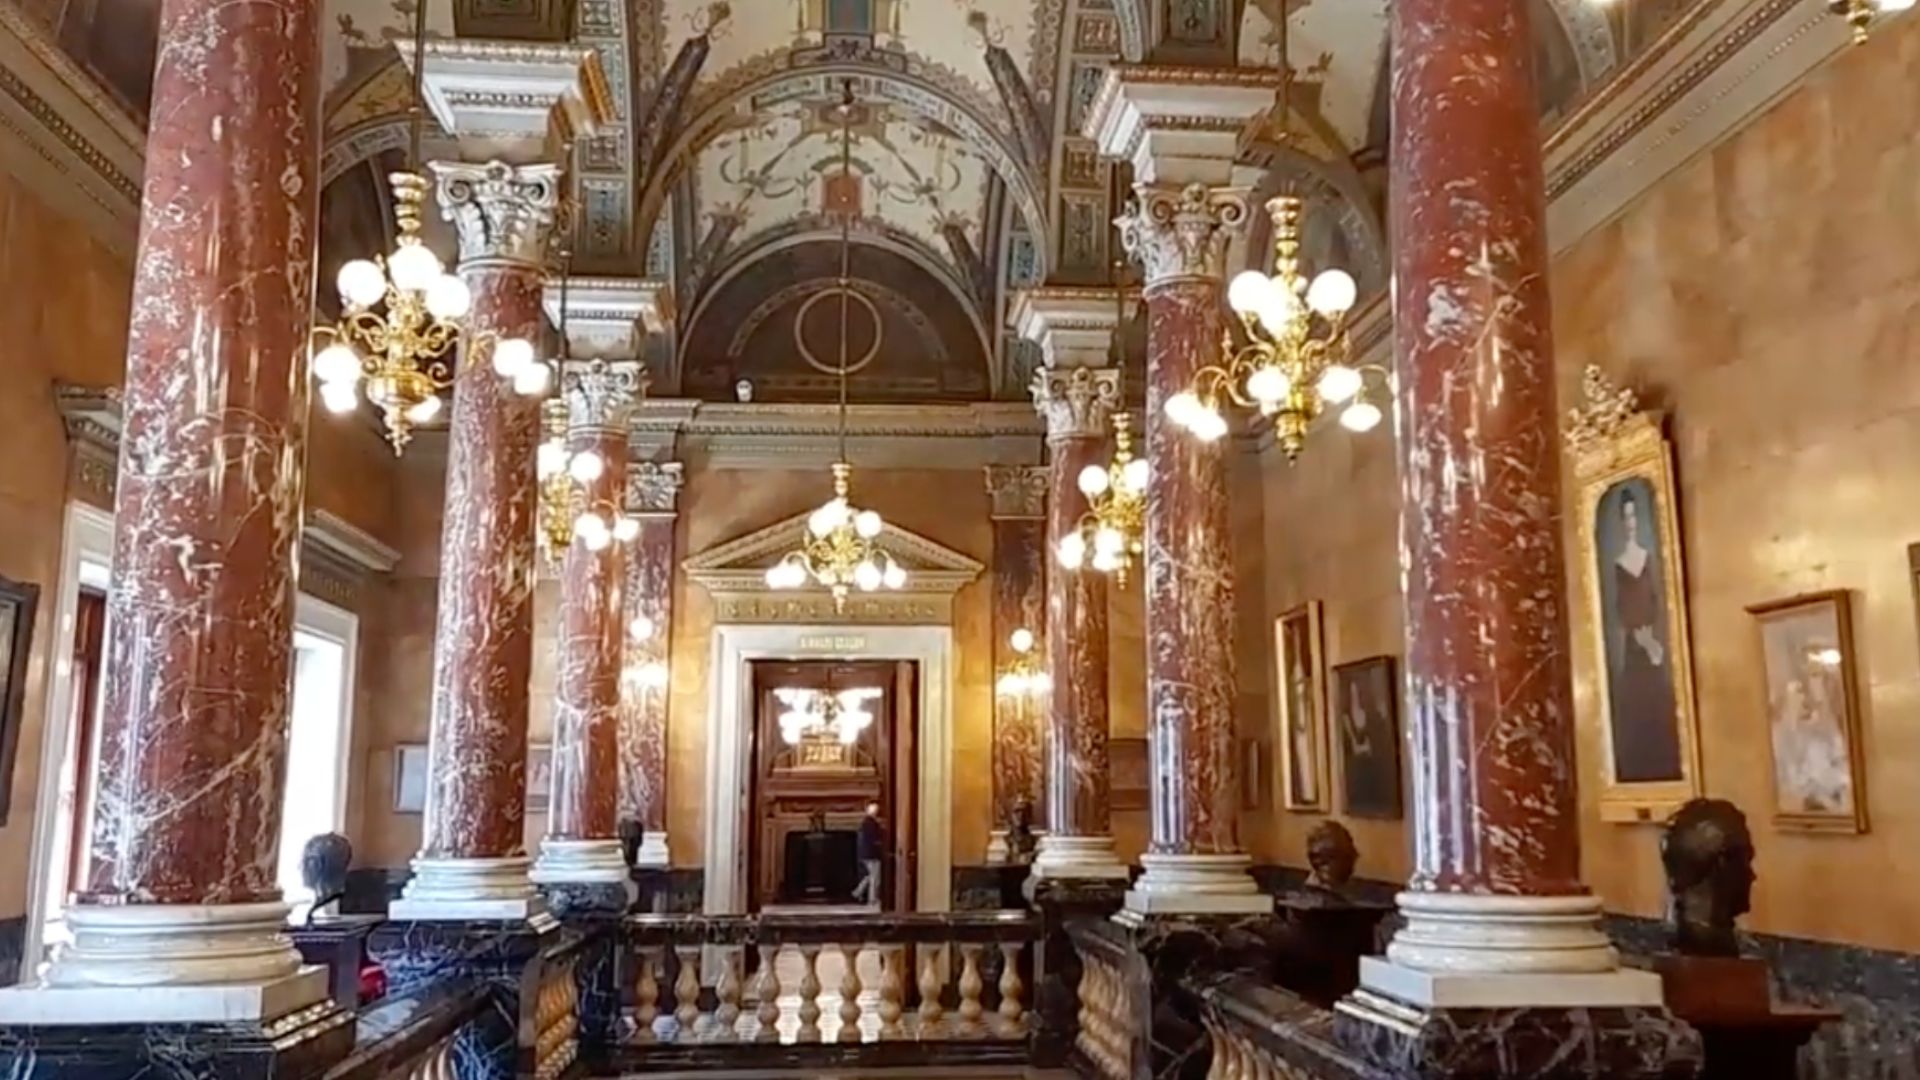 The grand lobby of the Hungarian State Opera House in Budapest, Hungary, with marble columns and chandeliers.